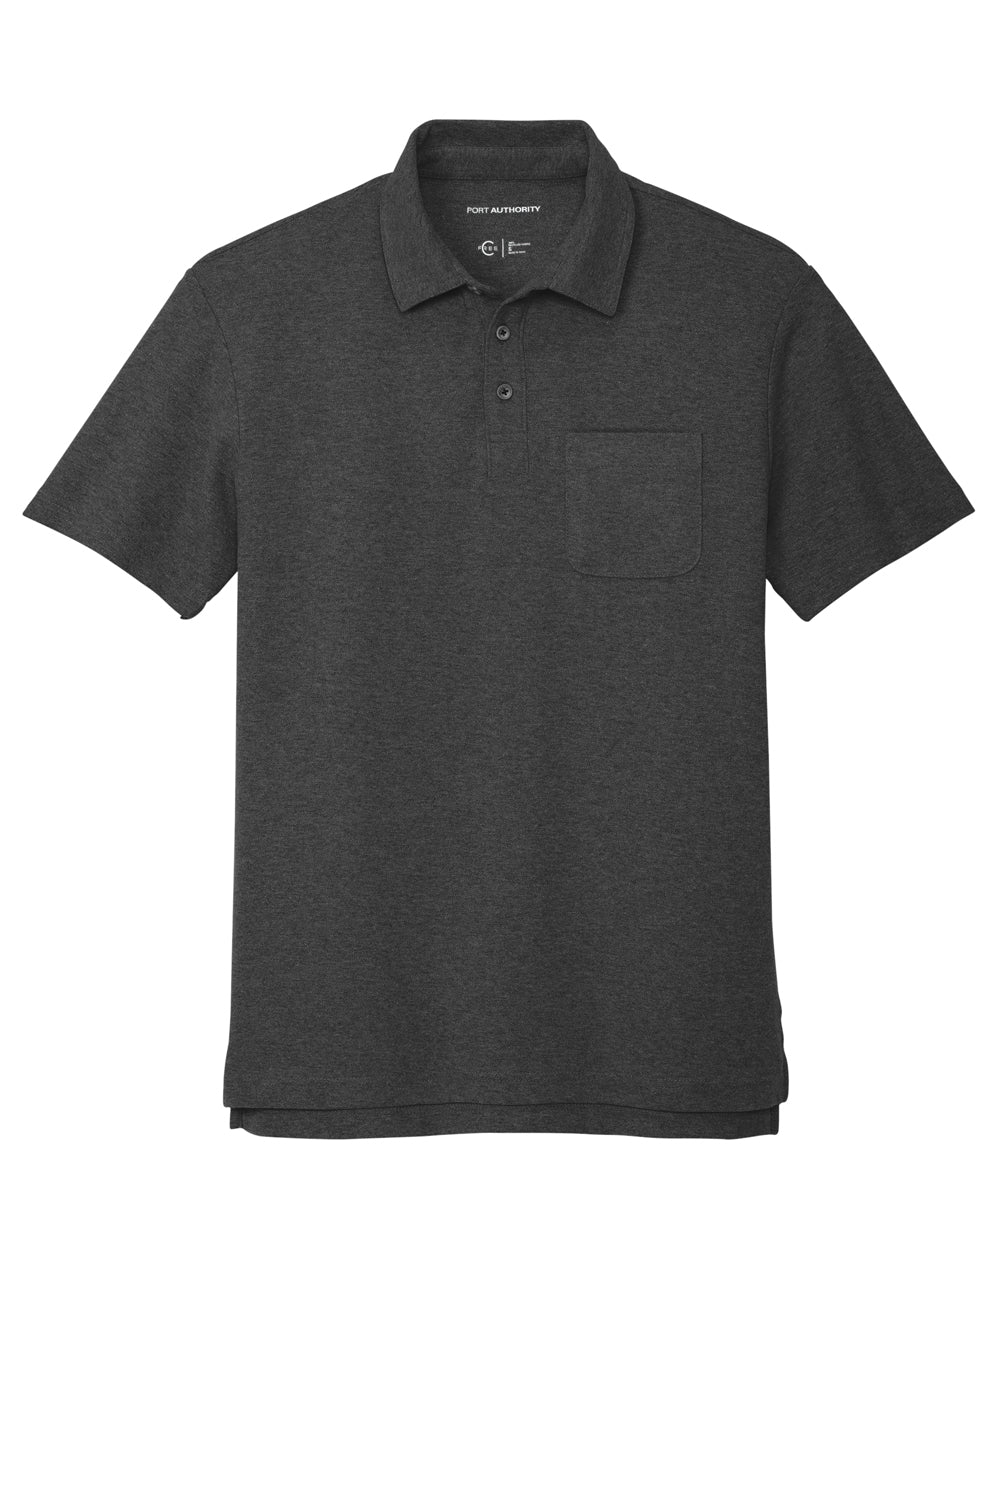 Port Authority K868 Mens C-FREE Pique Short Sleeve Polo Shirt w/ Pocket Heather Charcoal Grey Flat Front